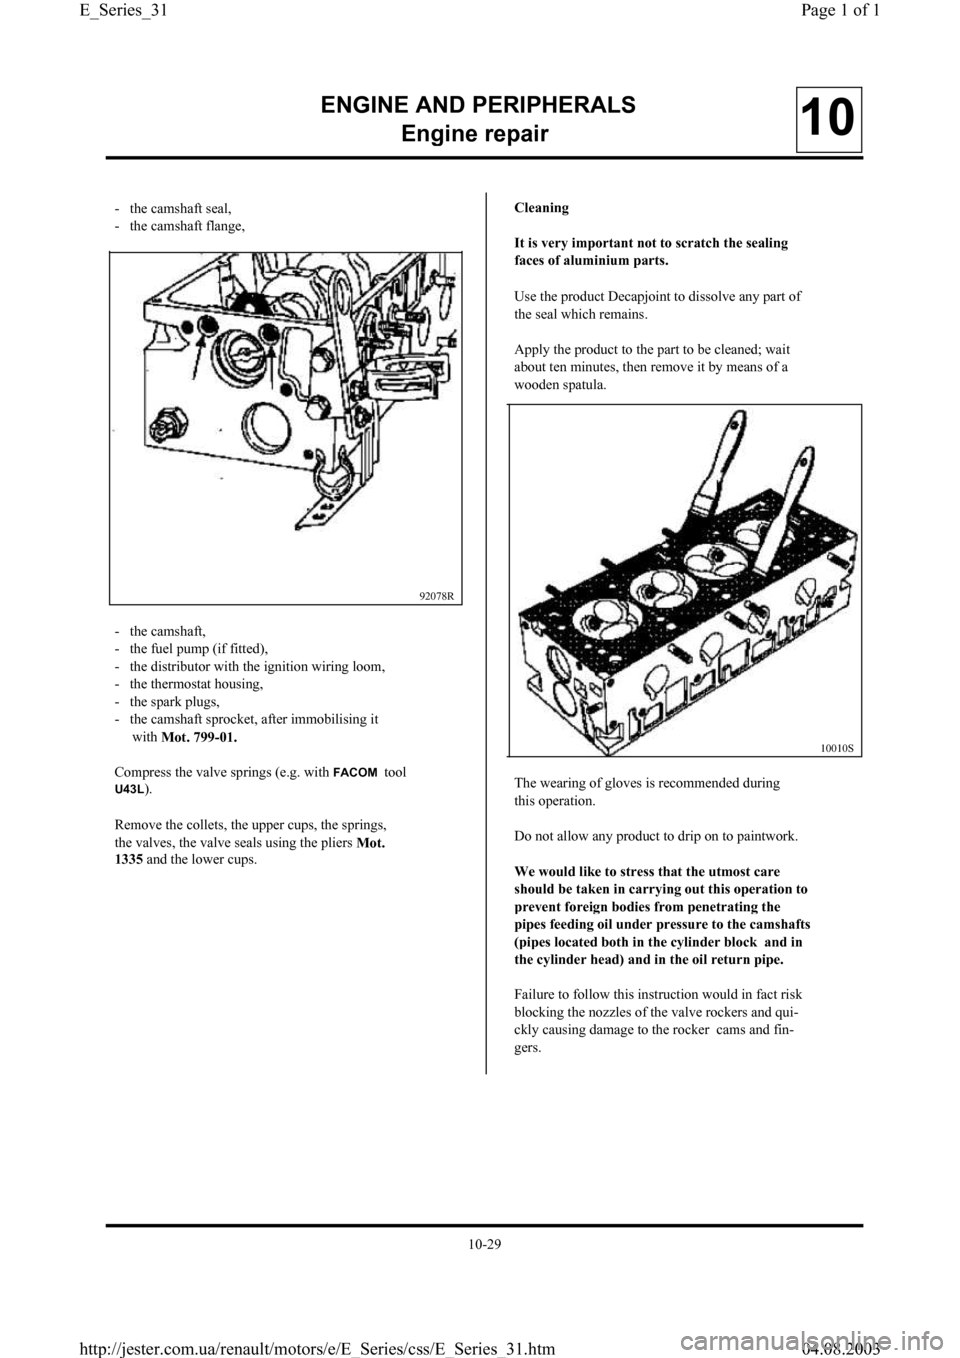 RENAULT CLIO 1997 X57 / 1.G Petrol Engines Owners Guide ENGINE AND PERIPHERALS
En
gine repair10
-   the camshaft seal,
-   the camshaft flange,
92078R
10010S
-   the camshaft,
-   the fuel pump (if fitted),
-   the distributor with the ignition wiring loom